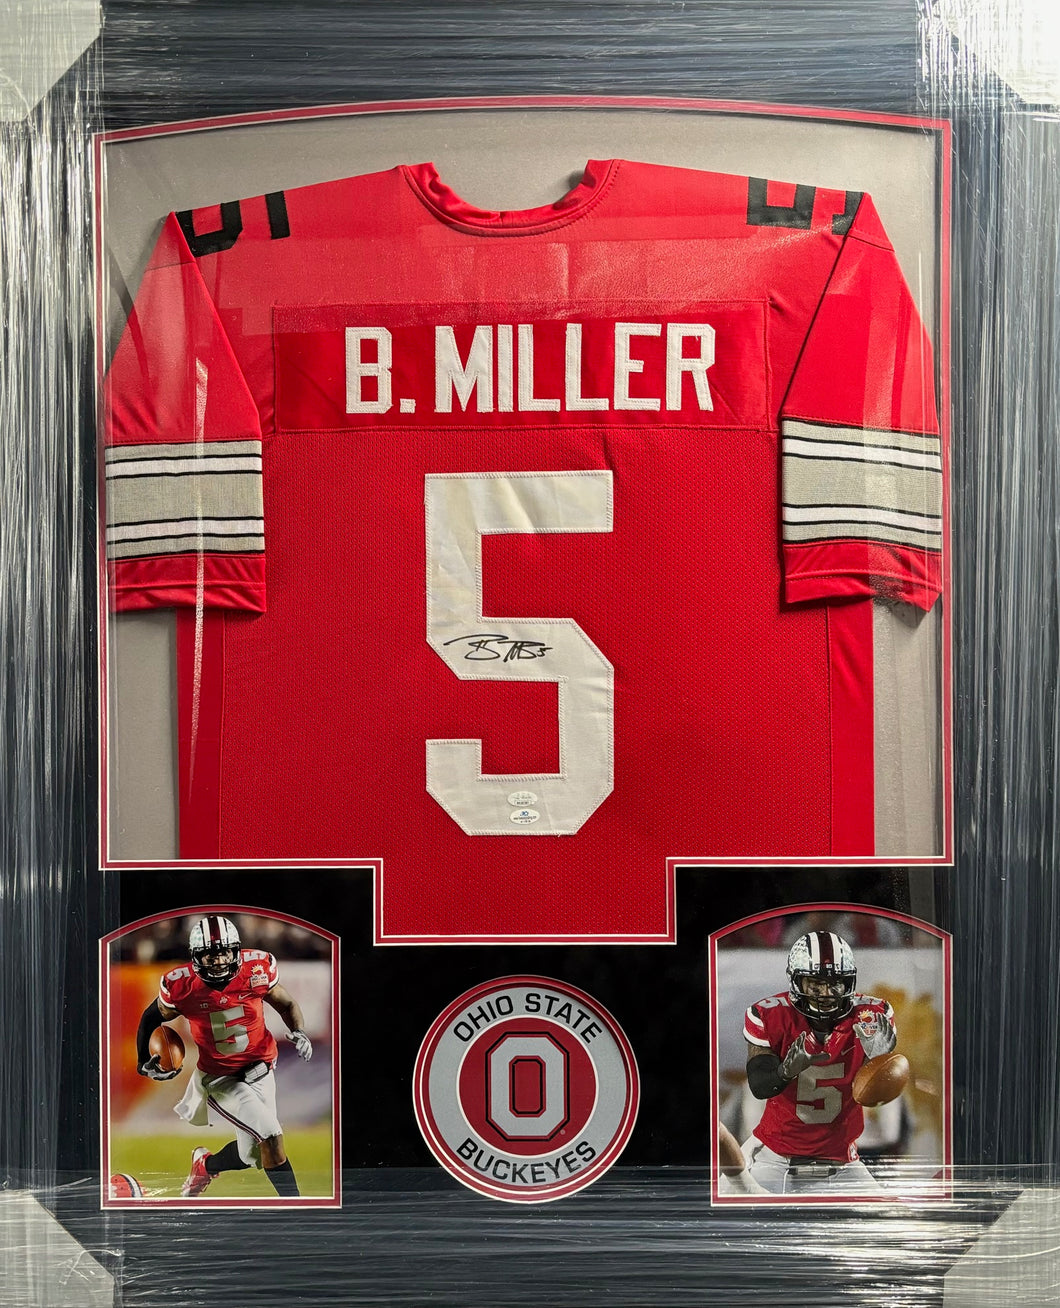 The Ohio State University Buckeyes Braxton Miller Signed Red Jersey Framed & Suede Matted with JSA COA